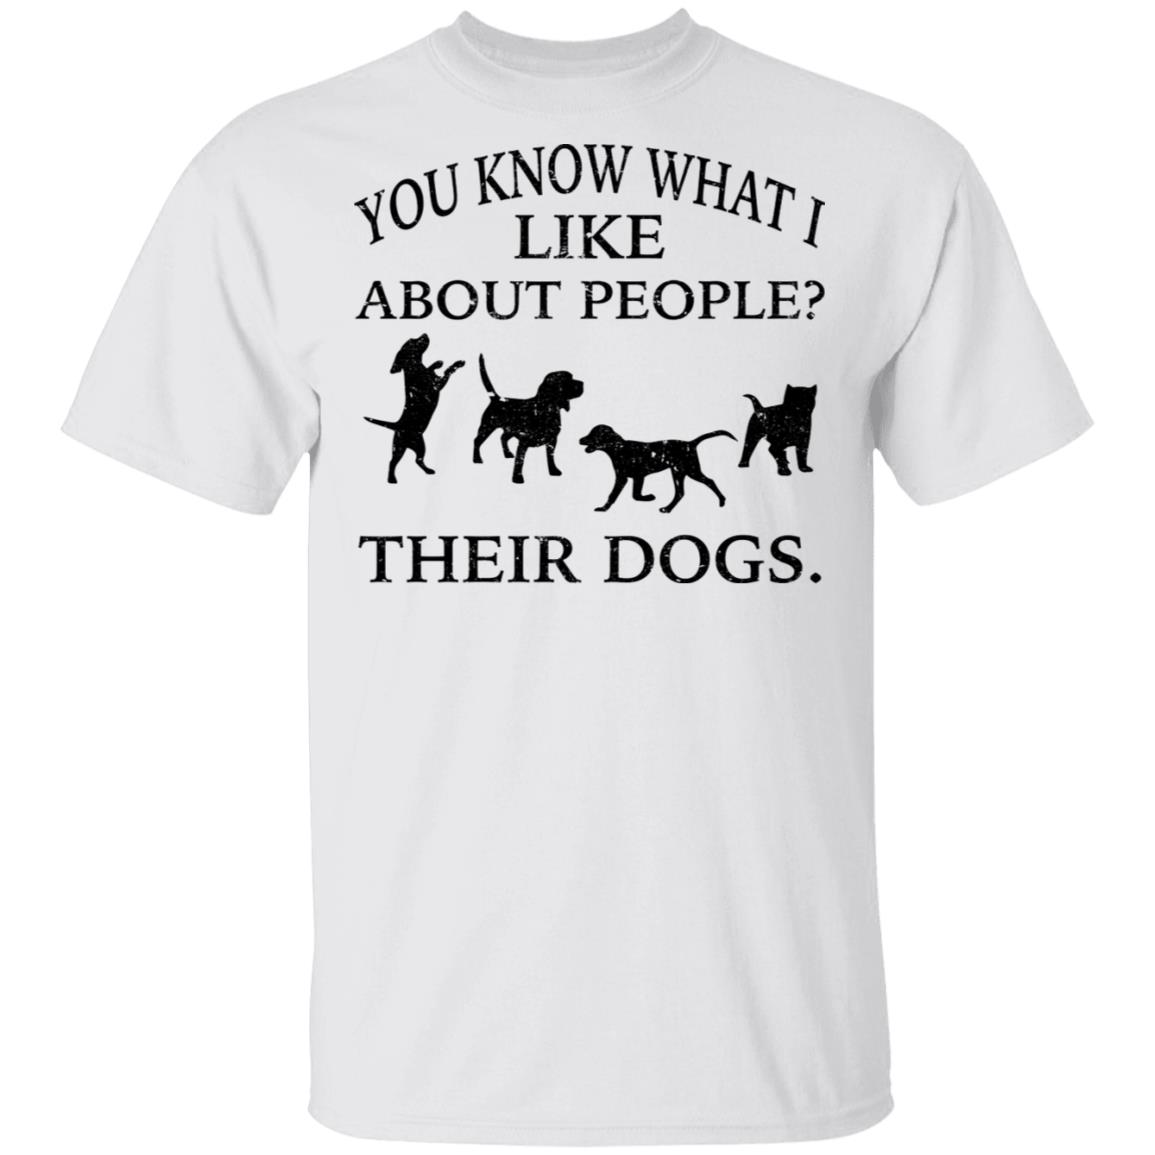 You know what i like about people their dogs shirt - Bucktee.com